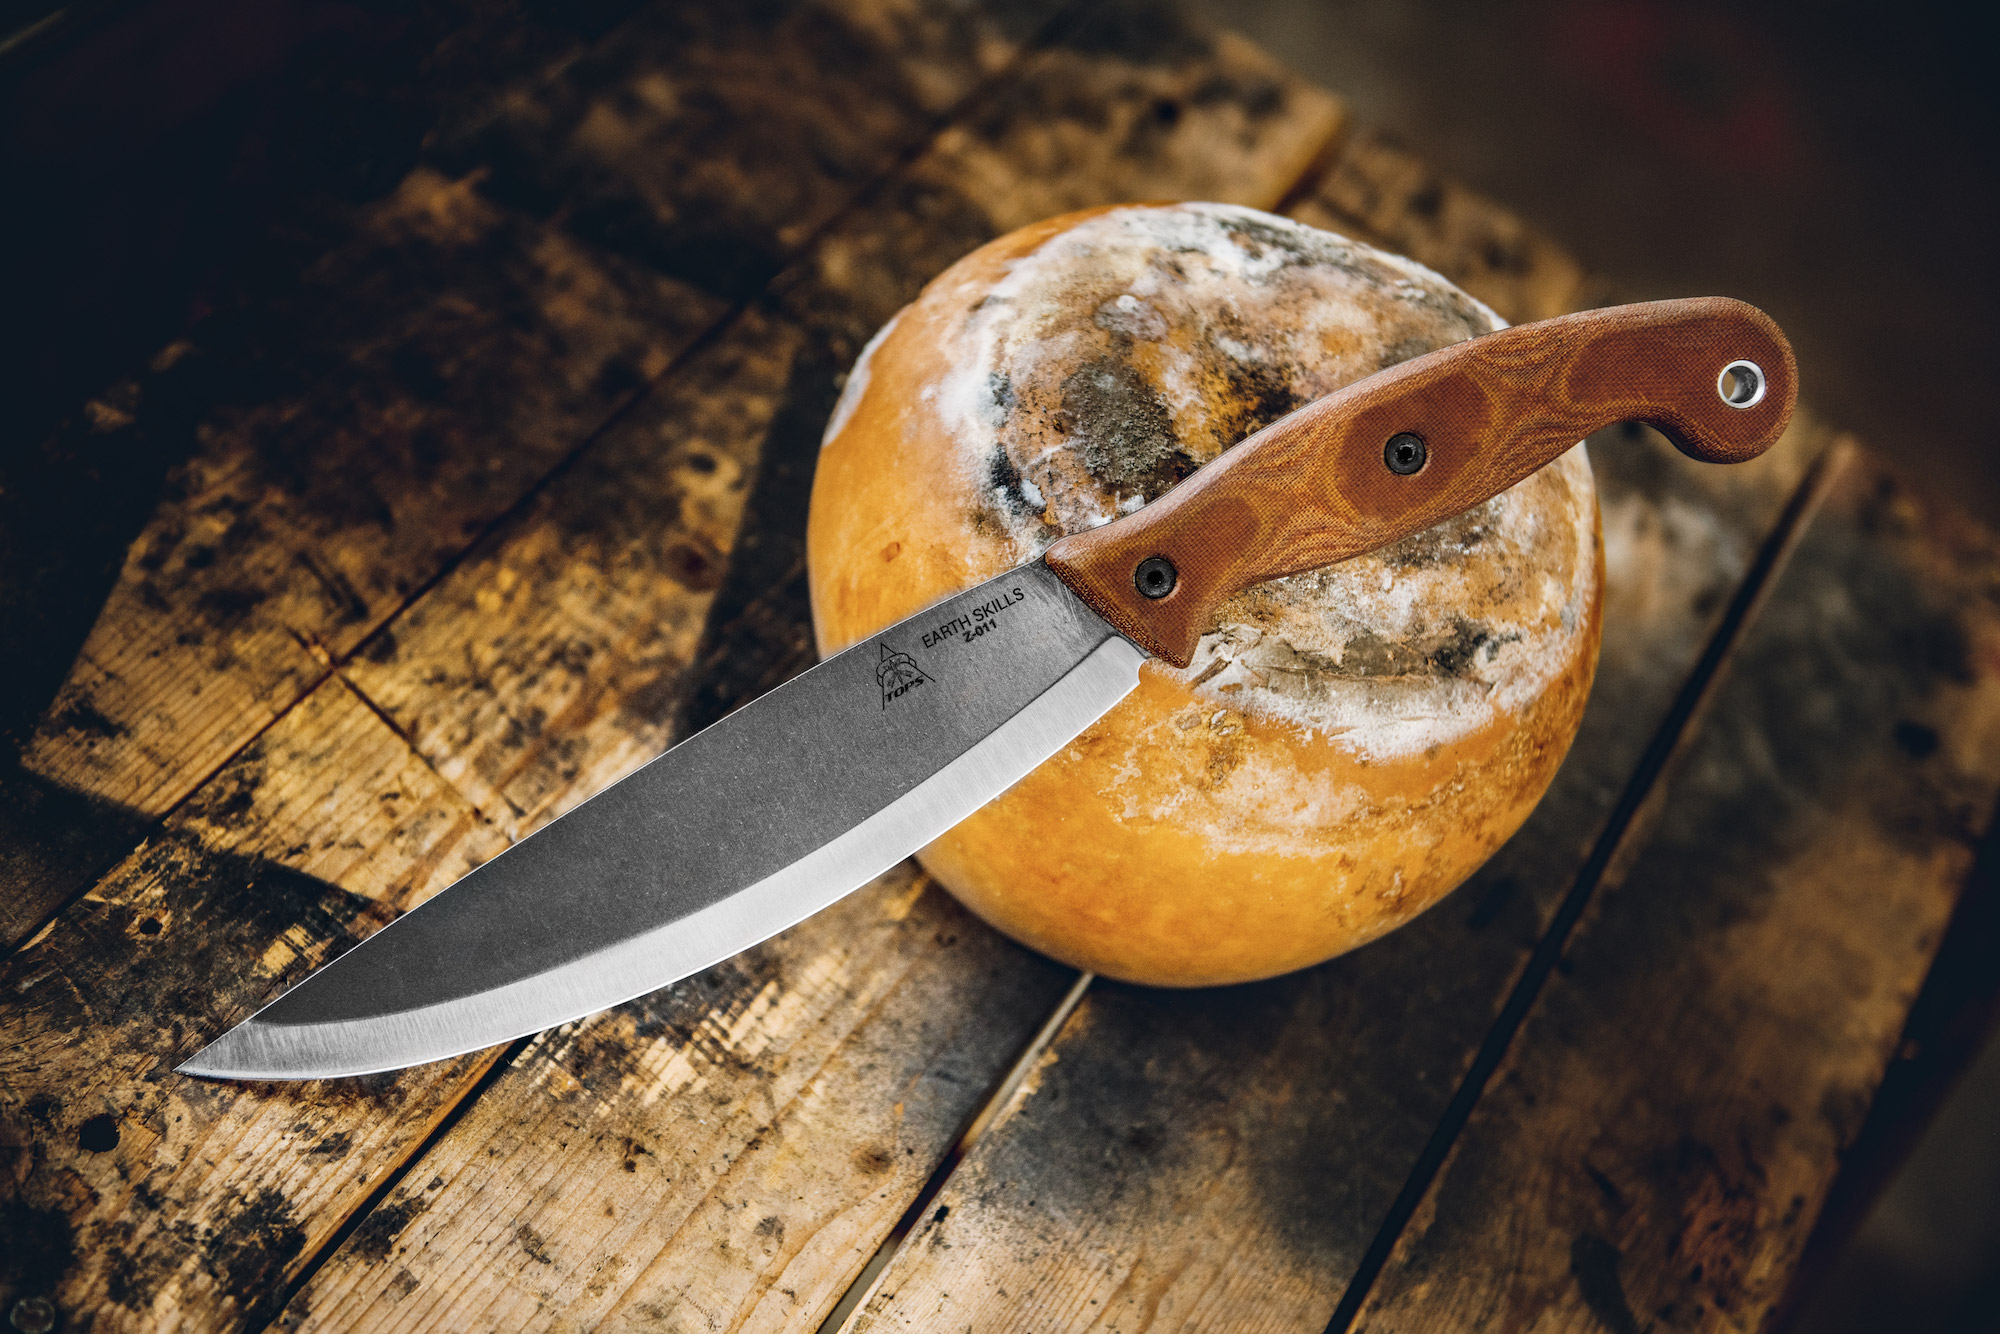 The Earth Skills Knife was designed by Matt Graham, who is much more than j...